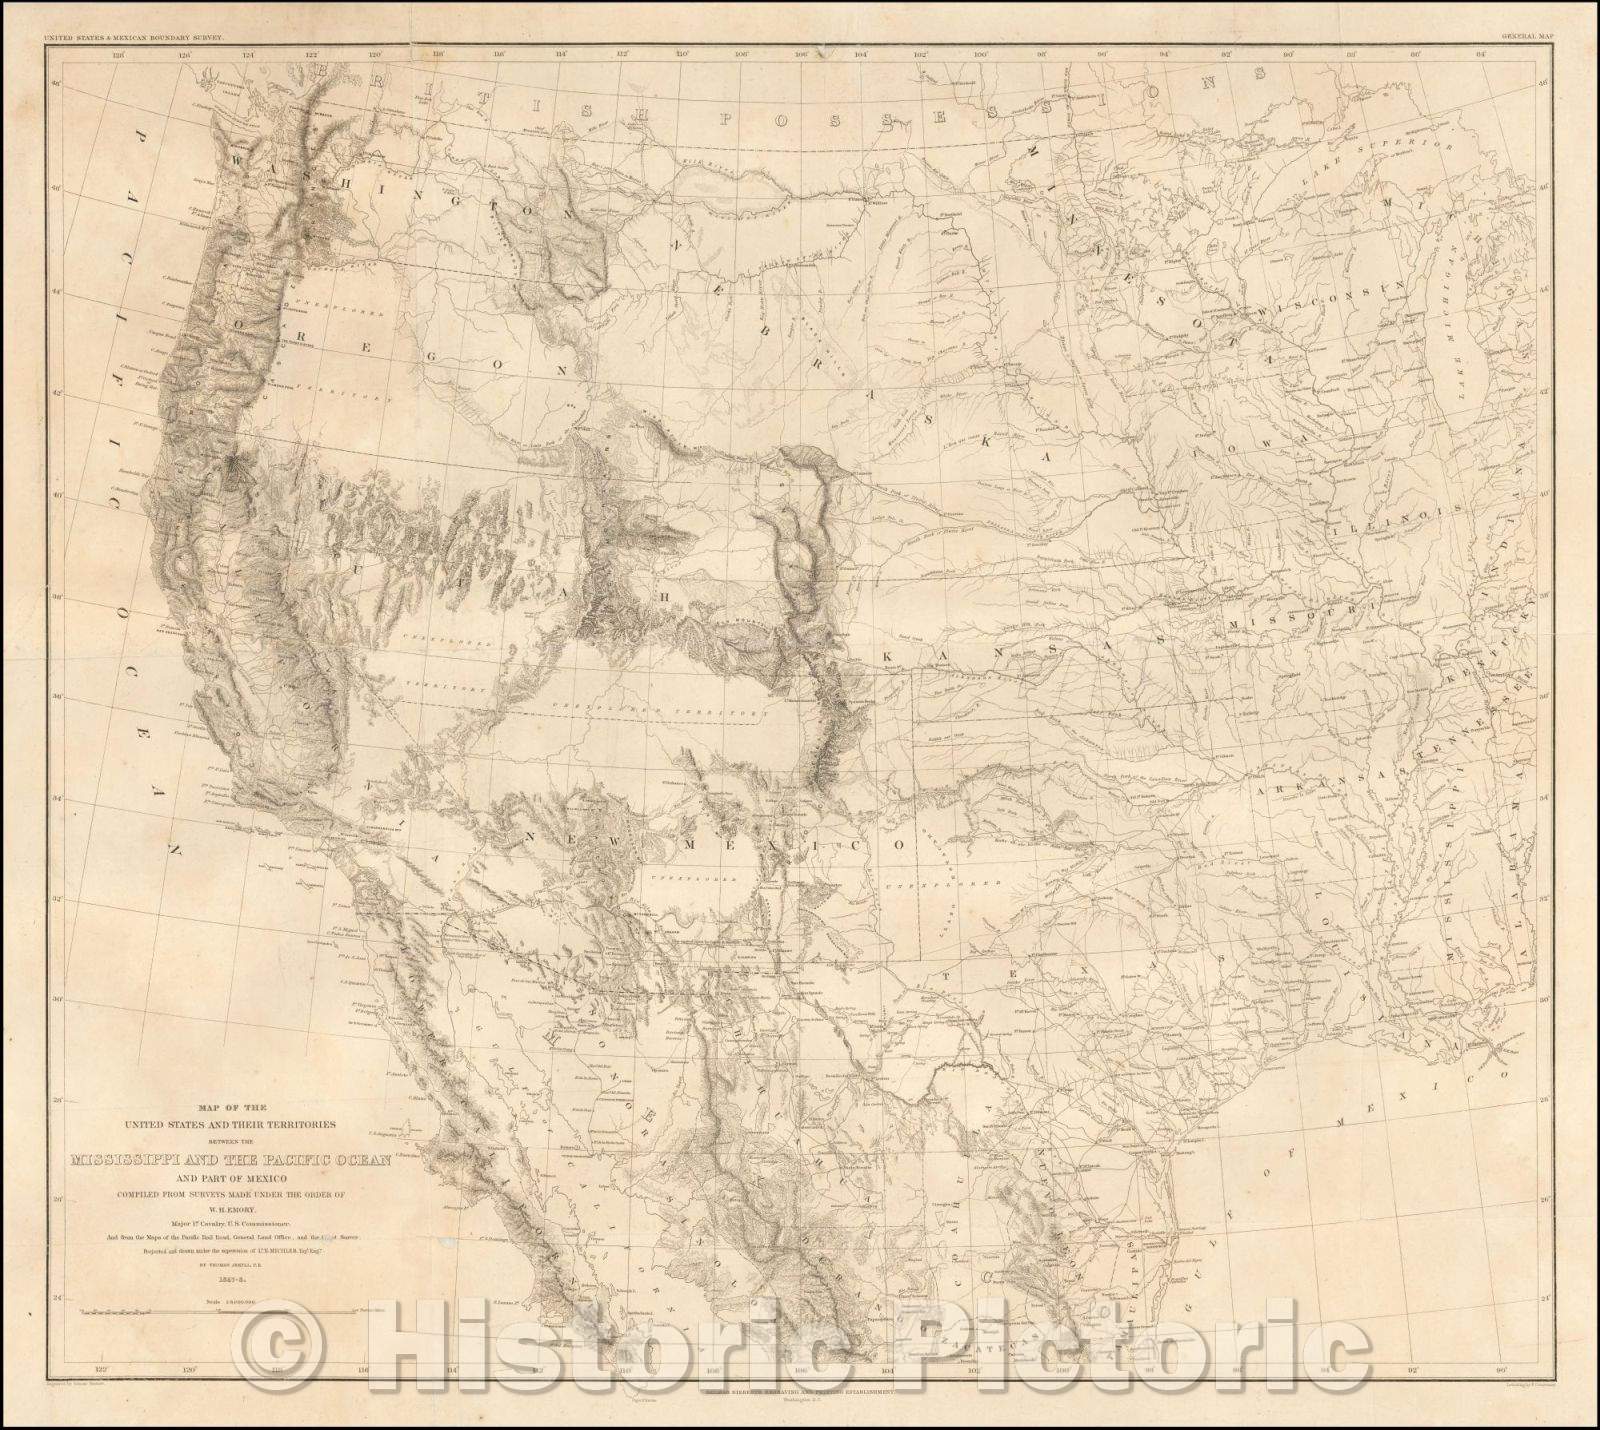 Historic Map - Map of the United States and Their Territories Between the Mississippi and the Pacific Ocean and Part of Mexico, 1858, William Hemsley Emory v1